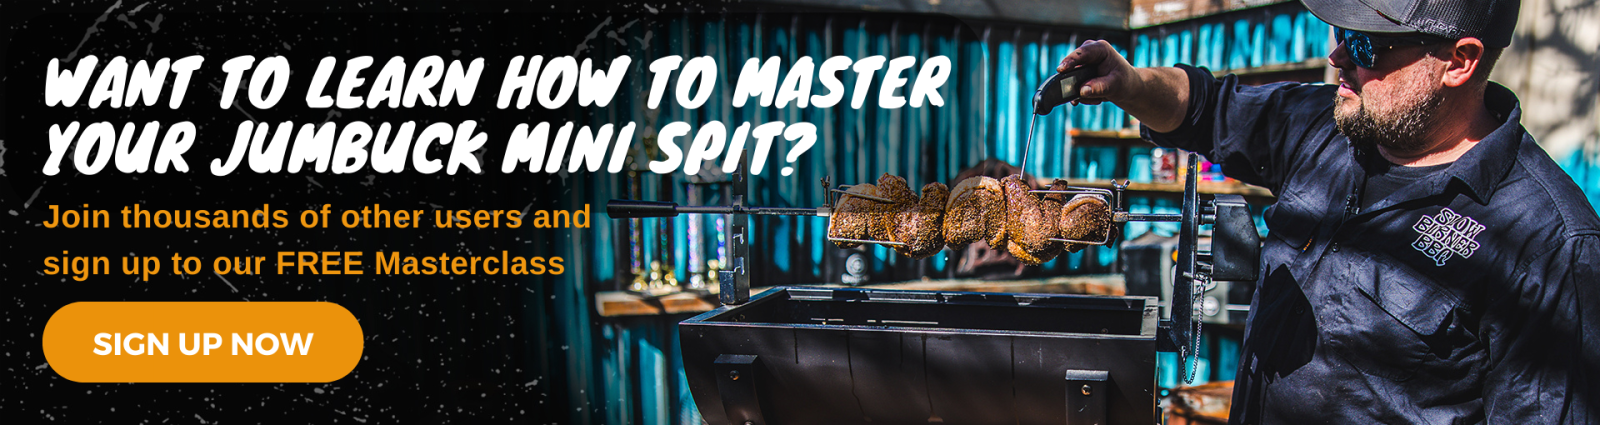 Want to learn more how to master your Jumbuck Mini Spit?